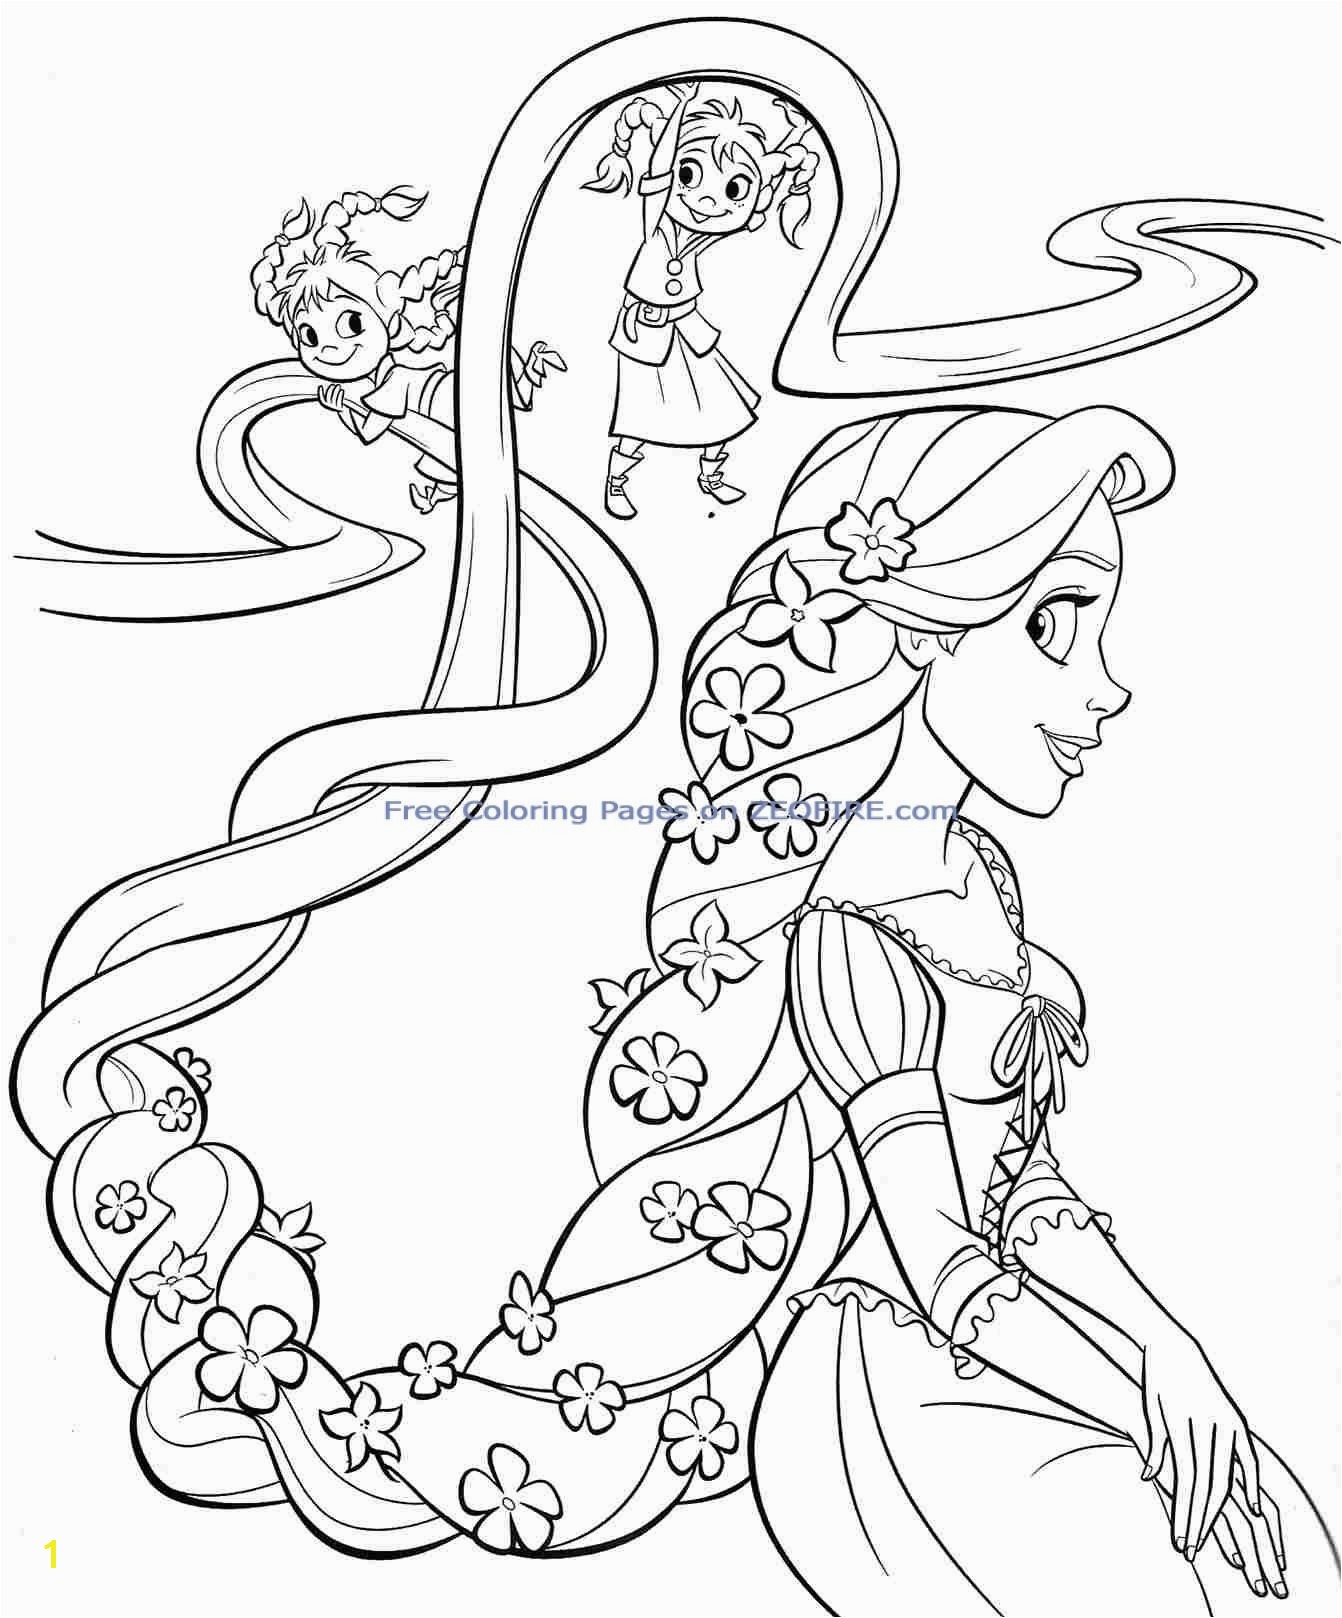 Disney Princess Coloring Pages Free to Print Lovely New Chuggington Coloring Pages Free Printabl Pin Od